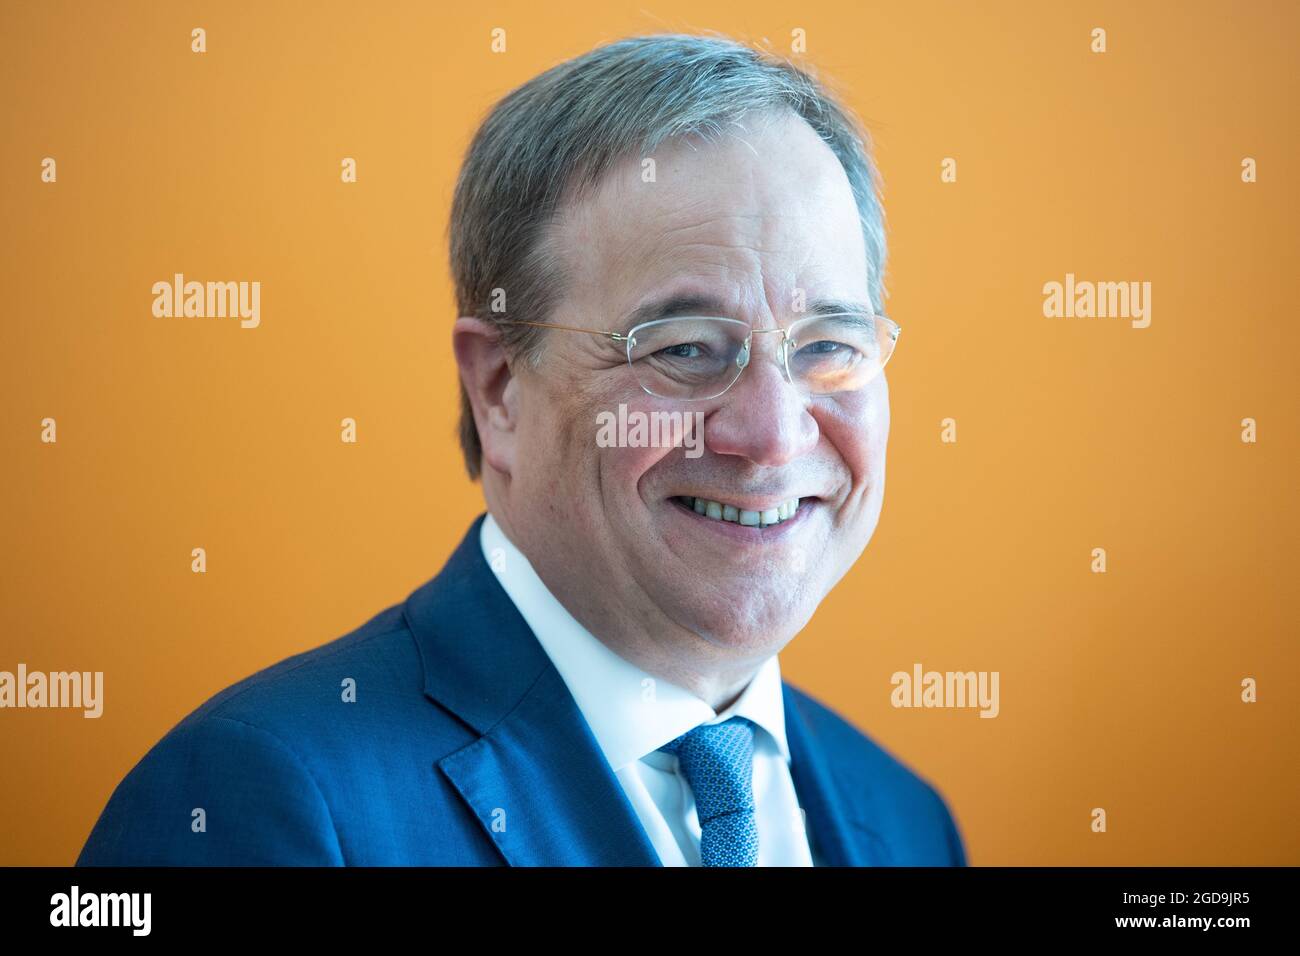 Dresden, Germany. 12th Aug, 2021. Armin Laschet, CDU Federal Chairman and Minister President of North Rhine-Westphalia, stands in the foyer during his visit to the factory of chip manufacturer Globalfoundries. Credit: Sebastian Kahnert/dpa-Zentralbild/POOL/dpa/Alamy Live News Stock Photo